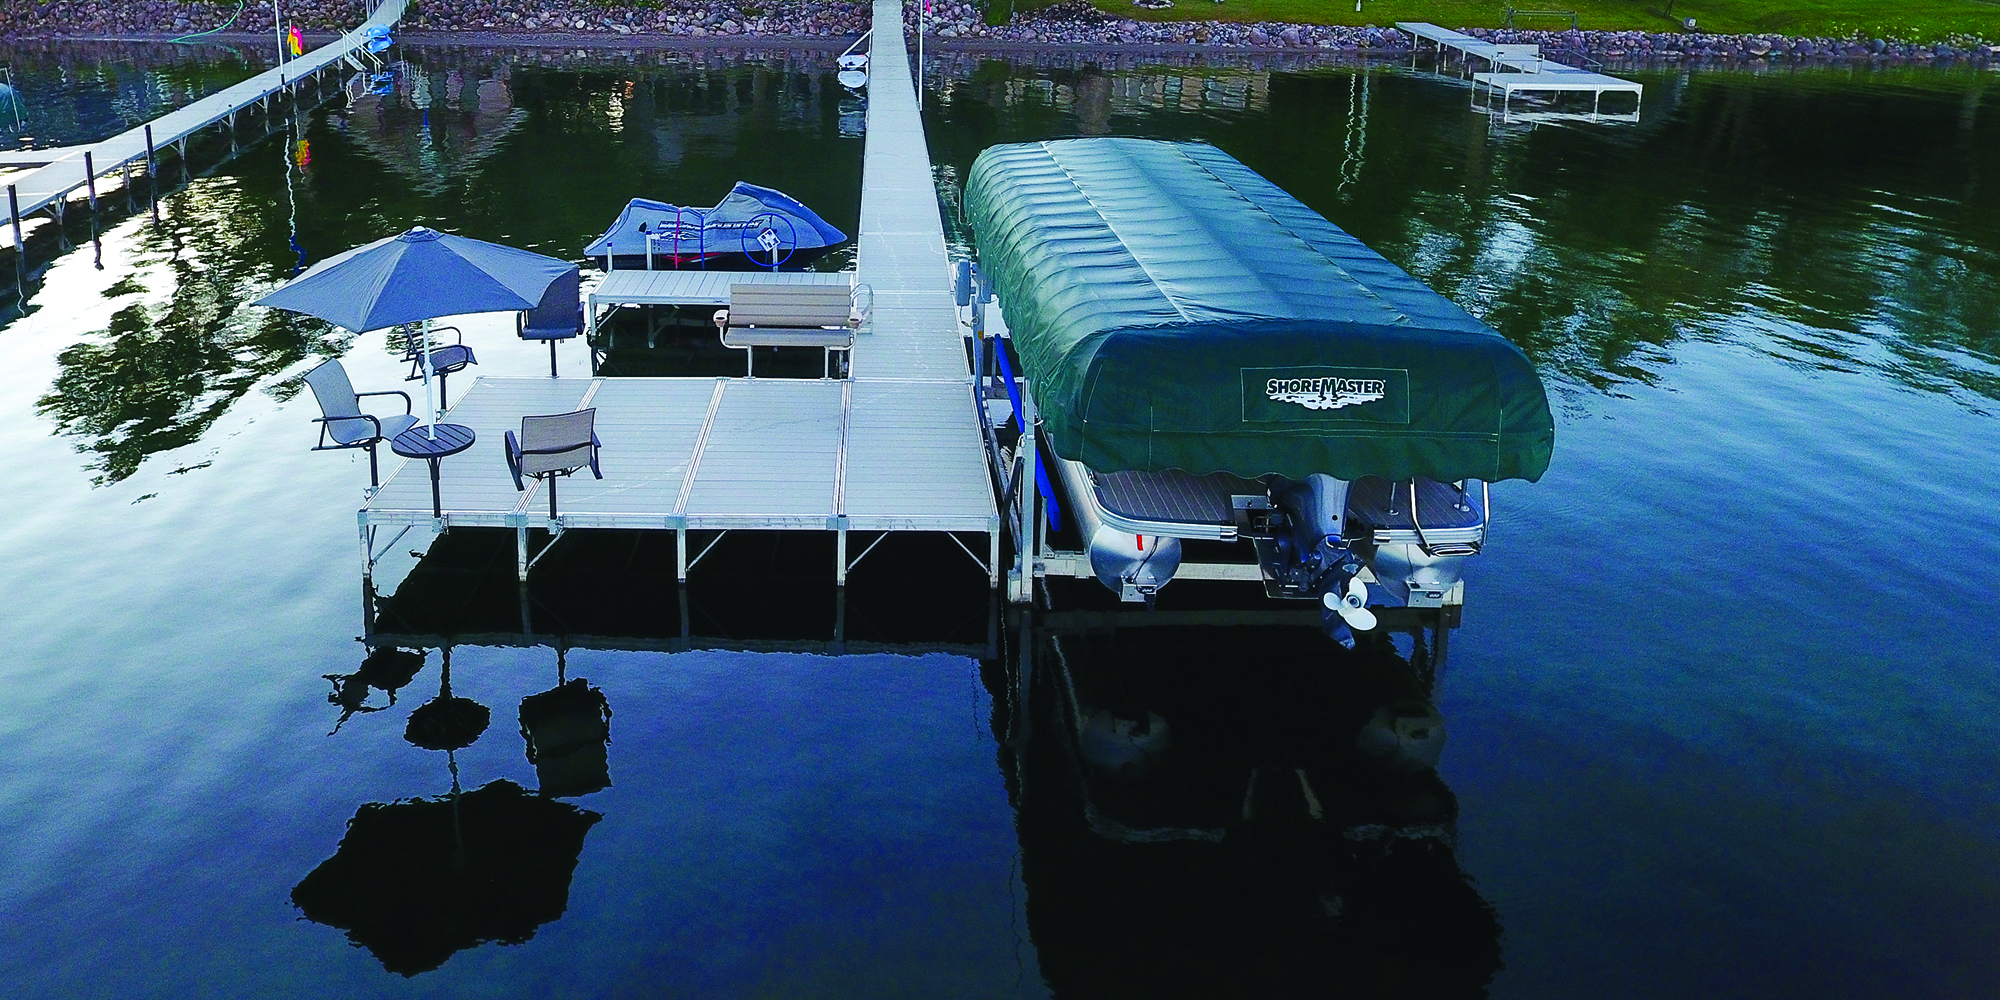 Boat dock with chairs and umbrellas on the water